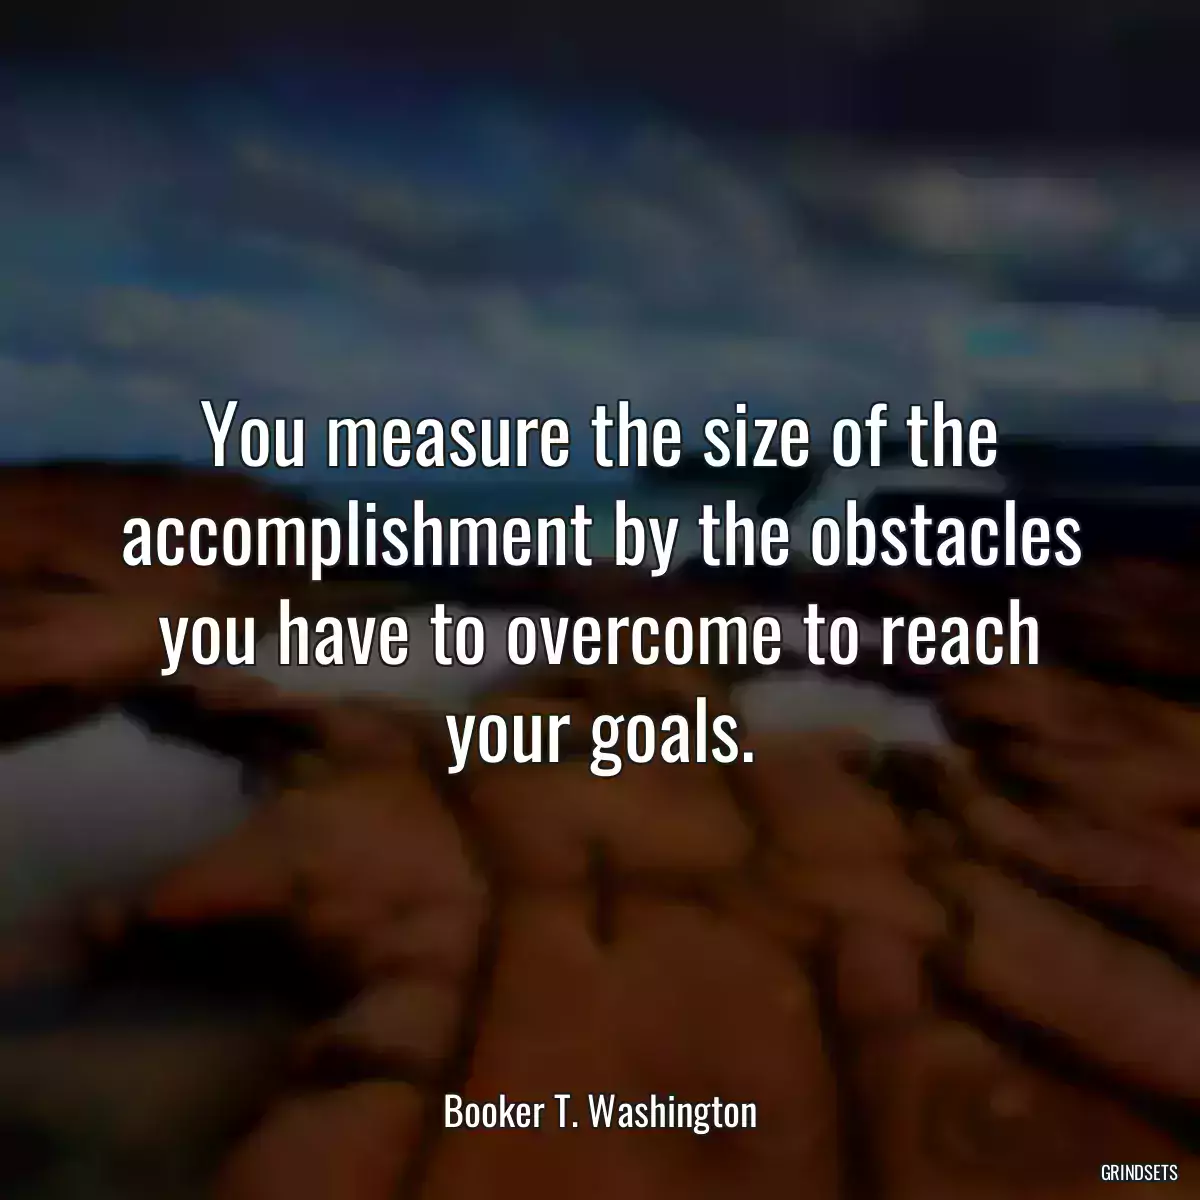 You measure the size of the accomplishment by the obstacles you have to overcome to reach your goals.